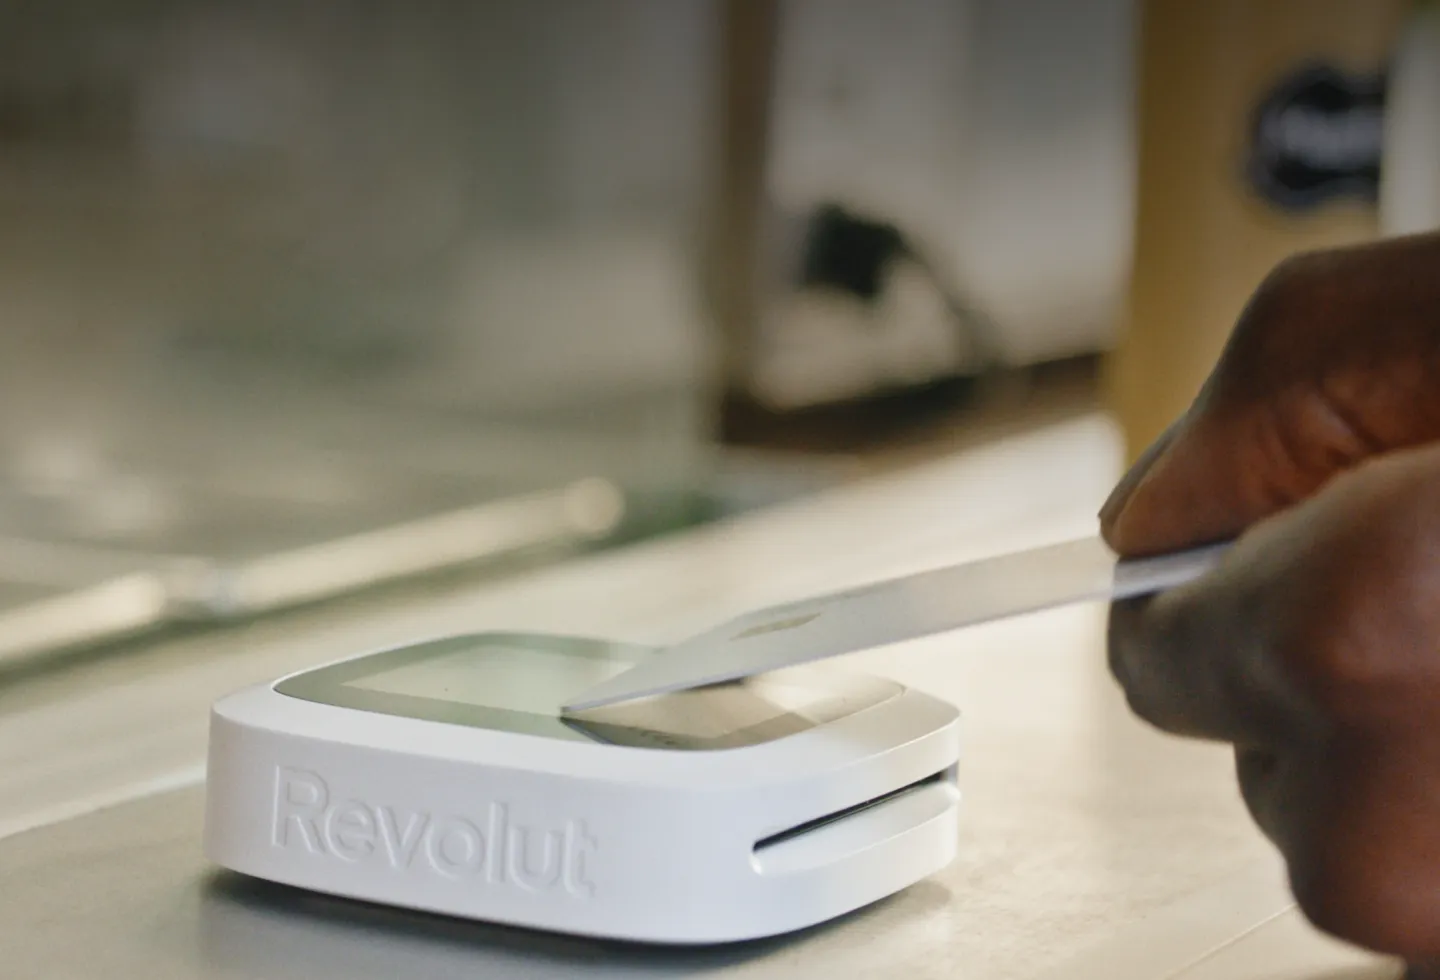 Image: Revolut Transforming Payment Service with Point of Sale